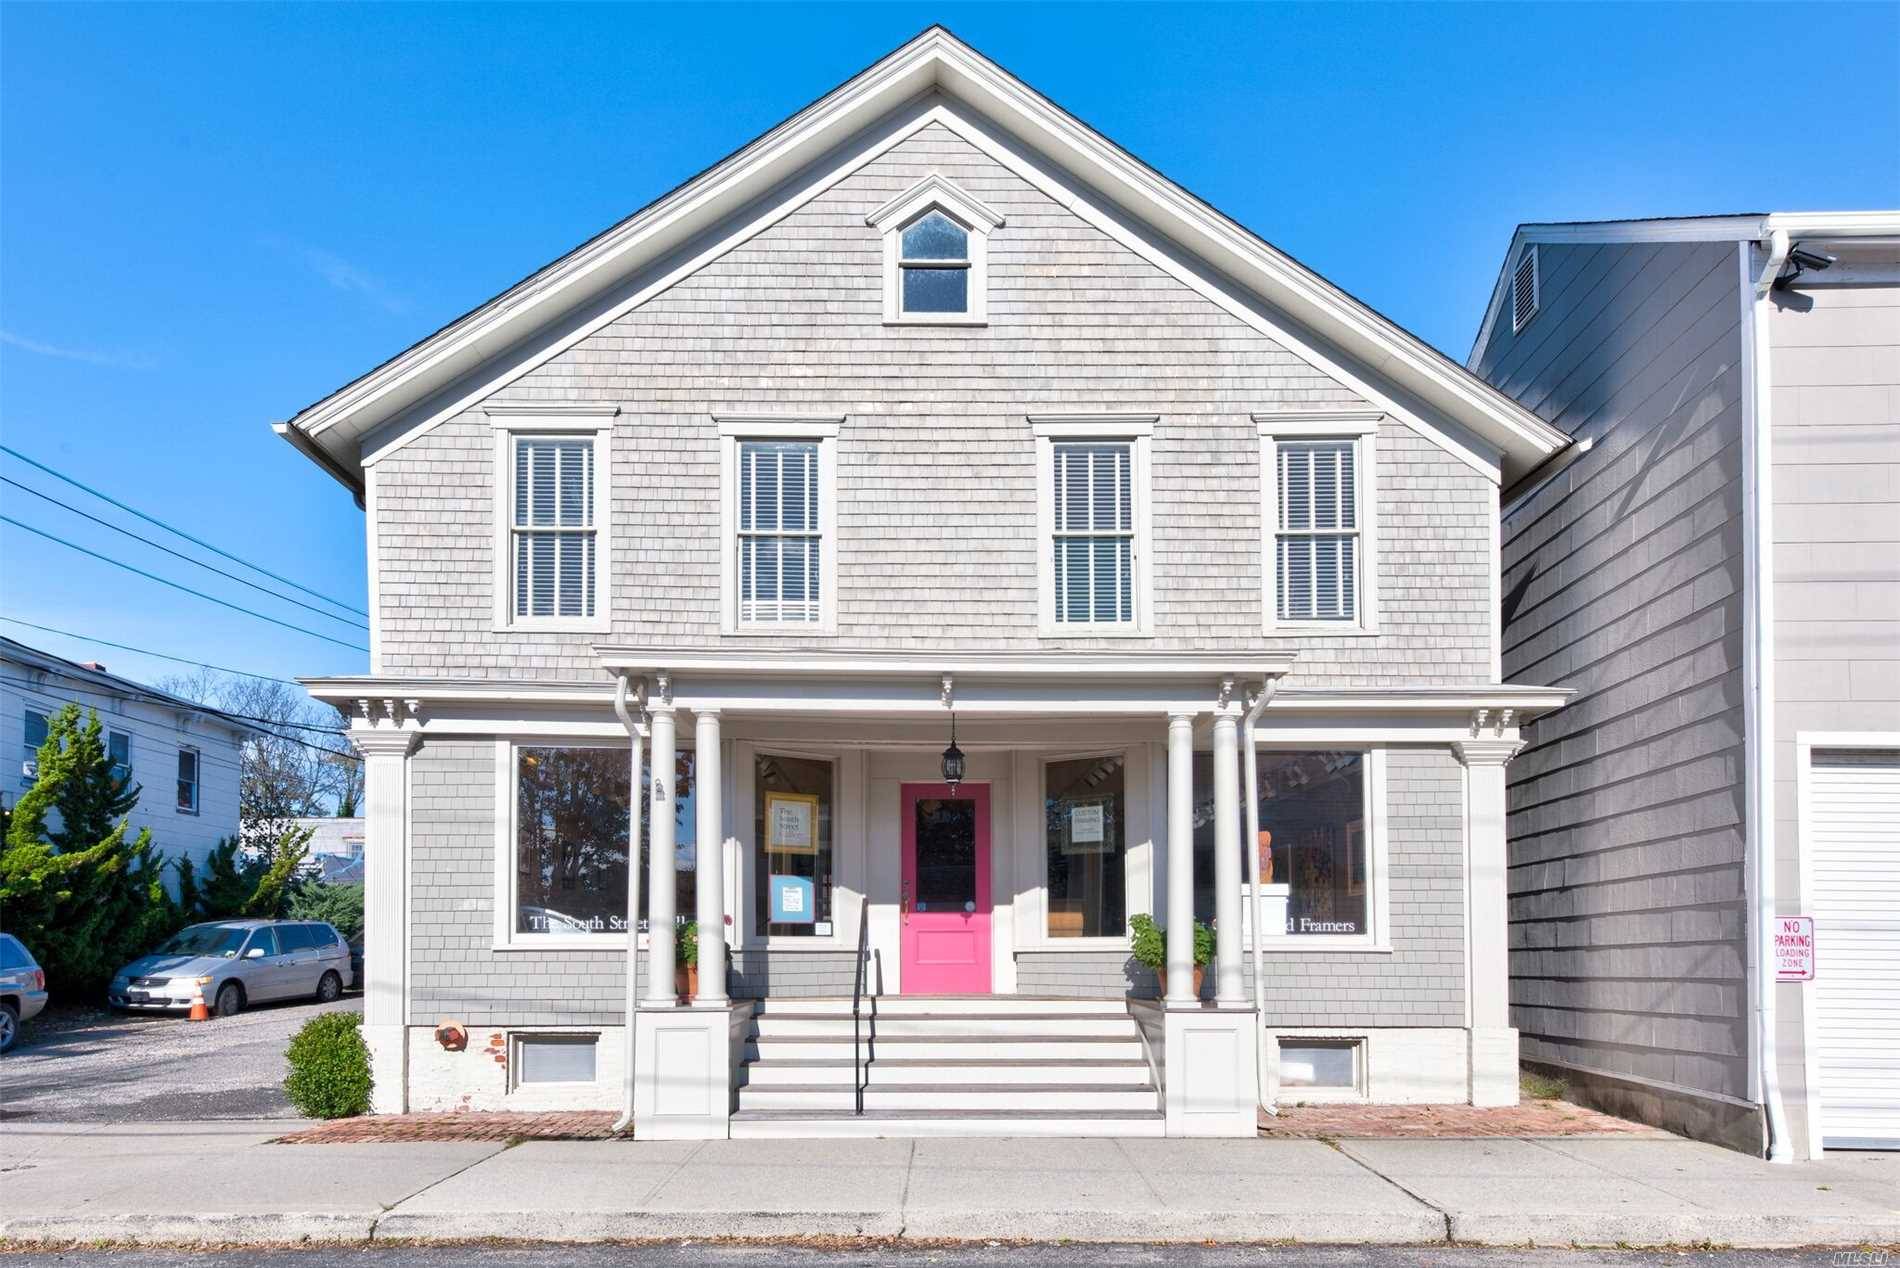 Rare opportunity to own an exceptional historic commercial building in the heart of Greenport Village.